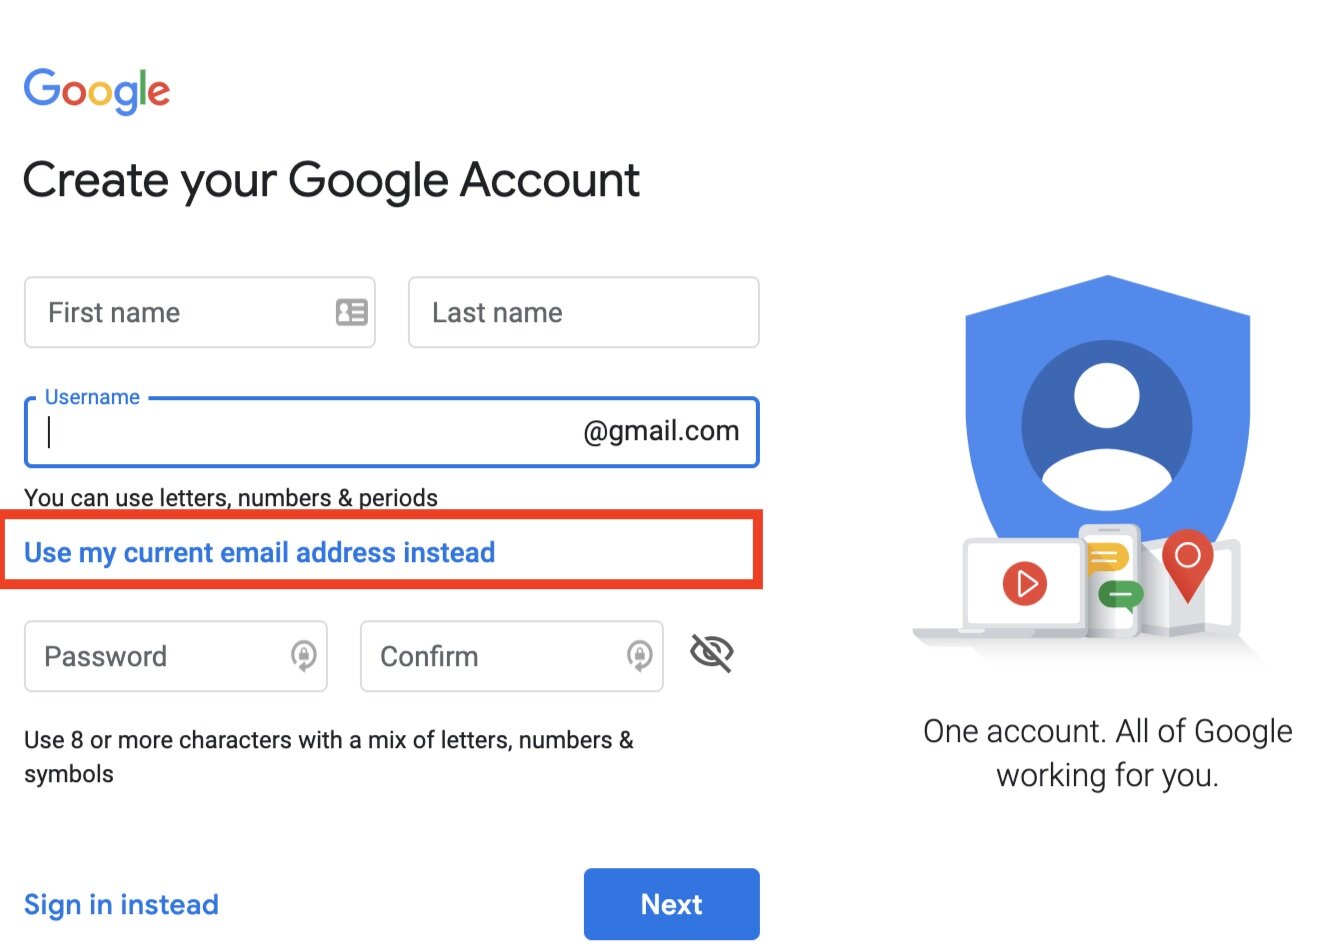 Can I create a Gmail account with my work email?